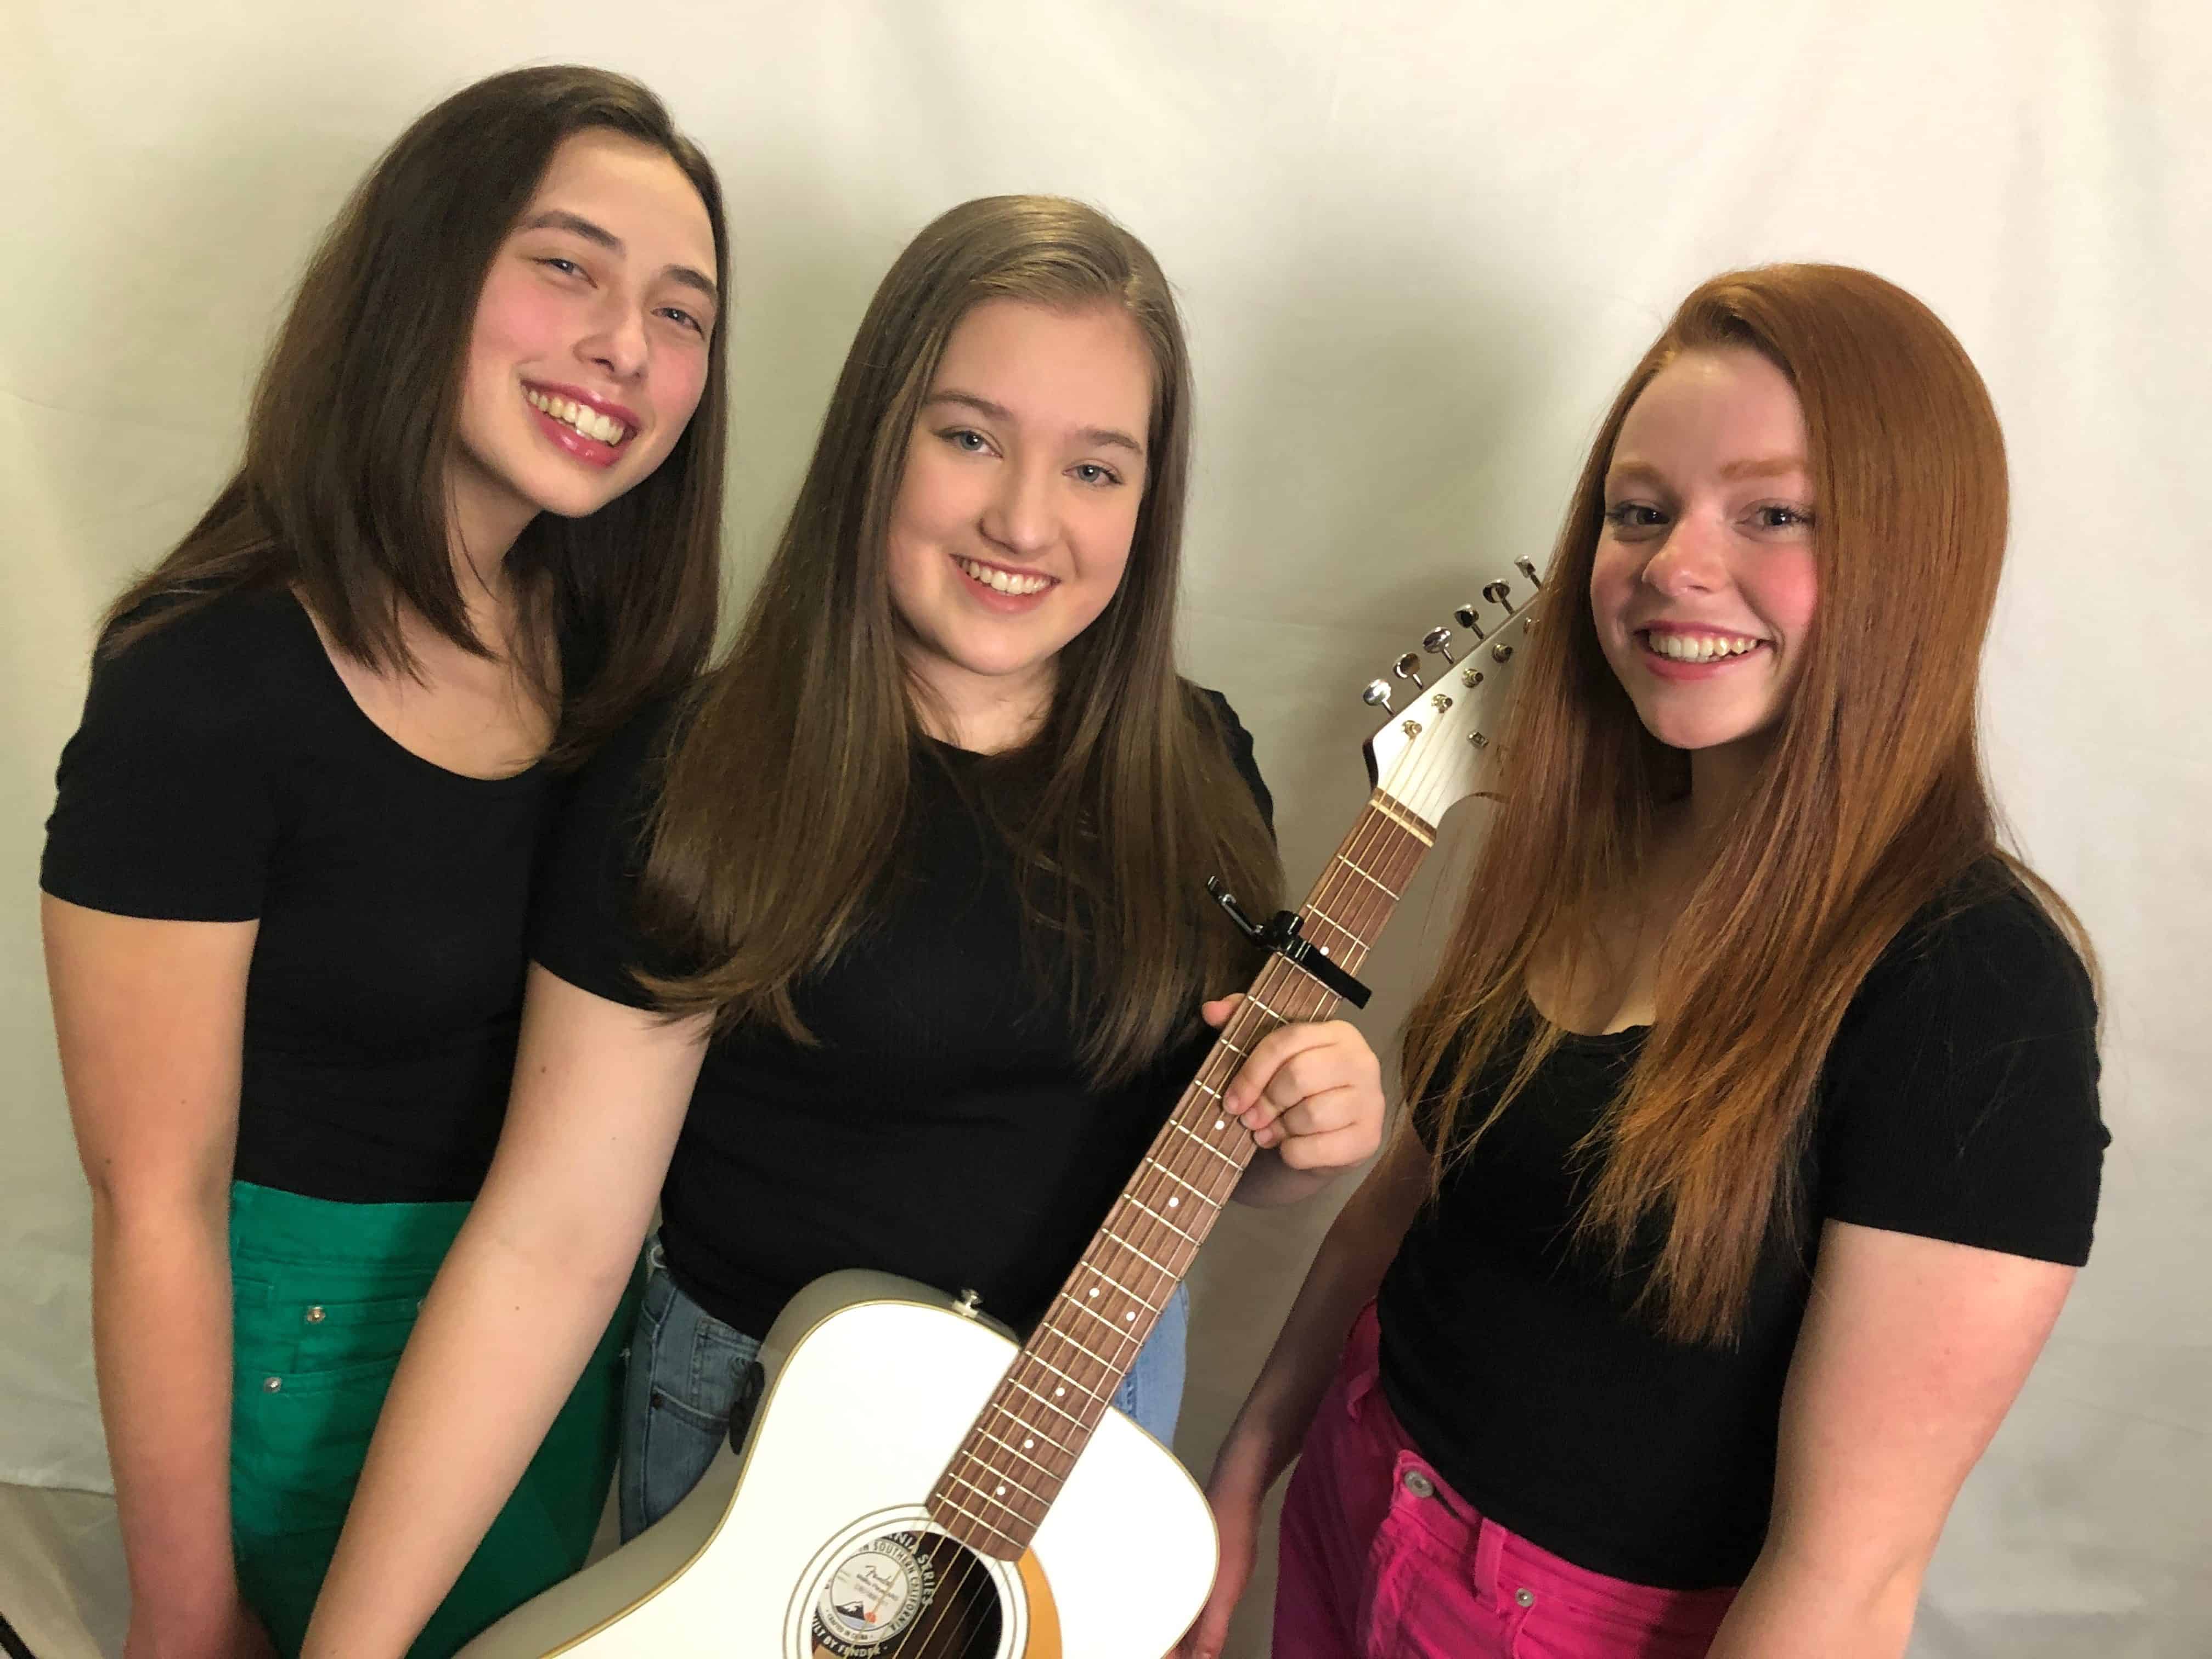 photo of three smiling women musicians and guitar